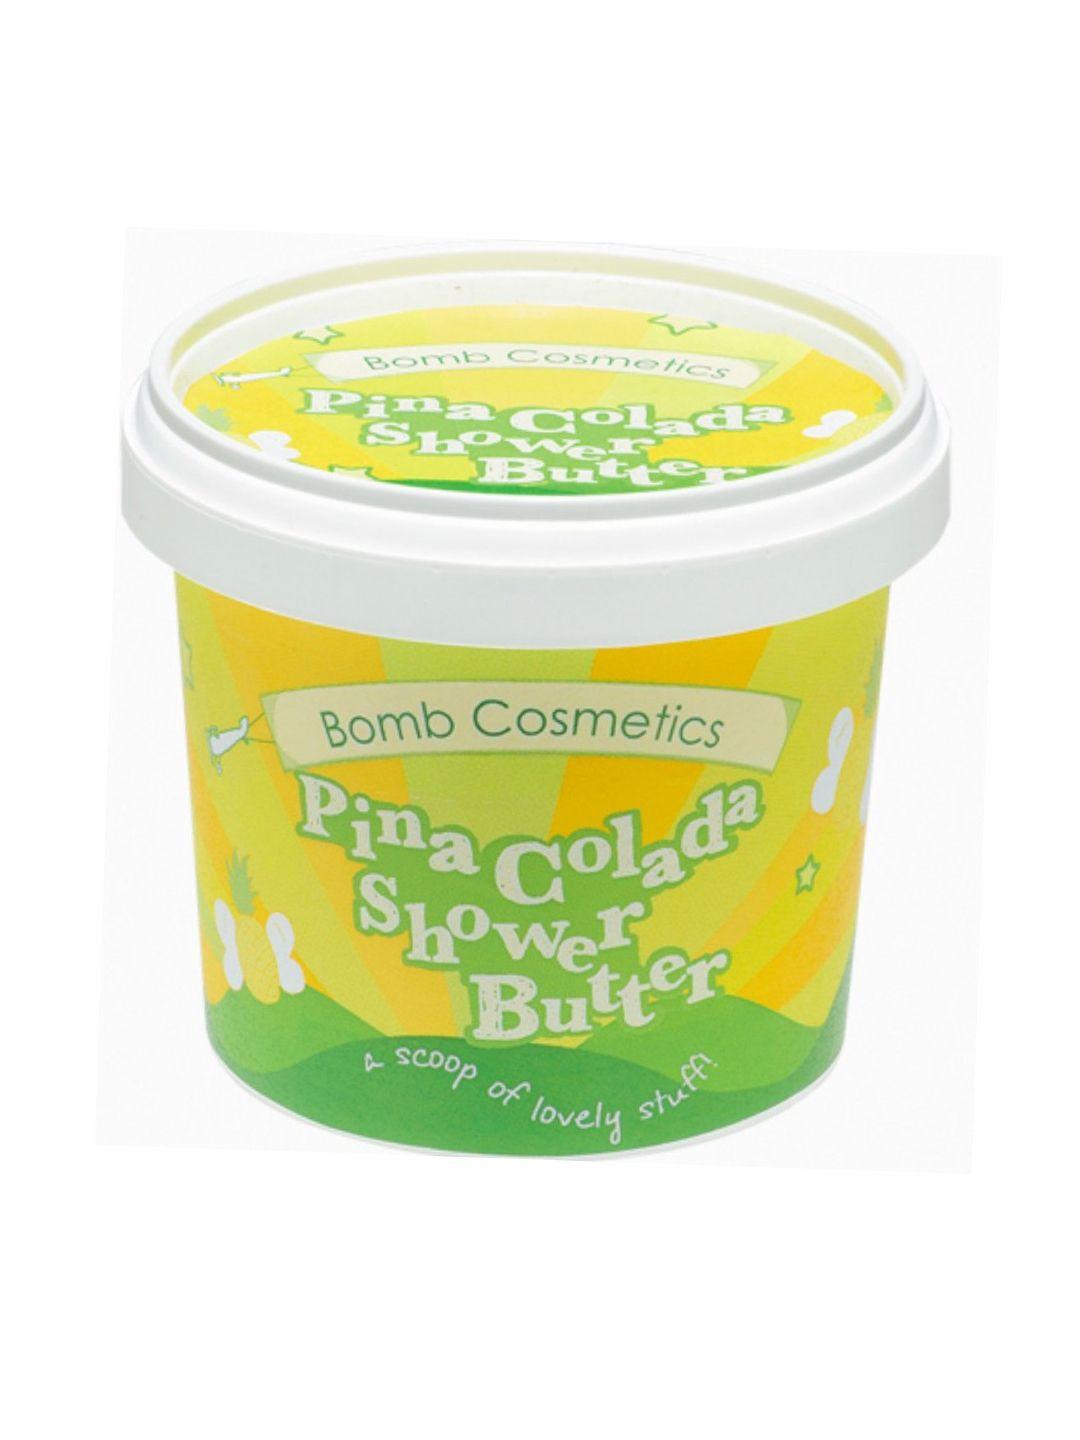 bomb cosmetics pina colada cleansing shower butter - 320 g